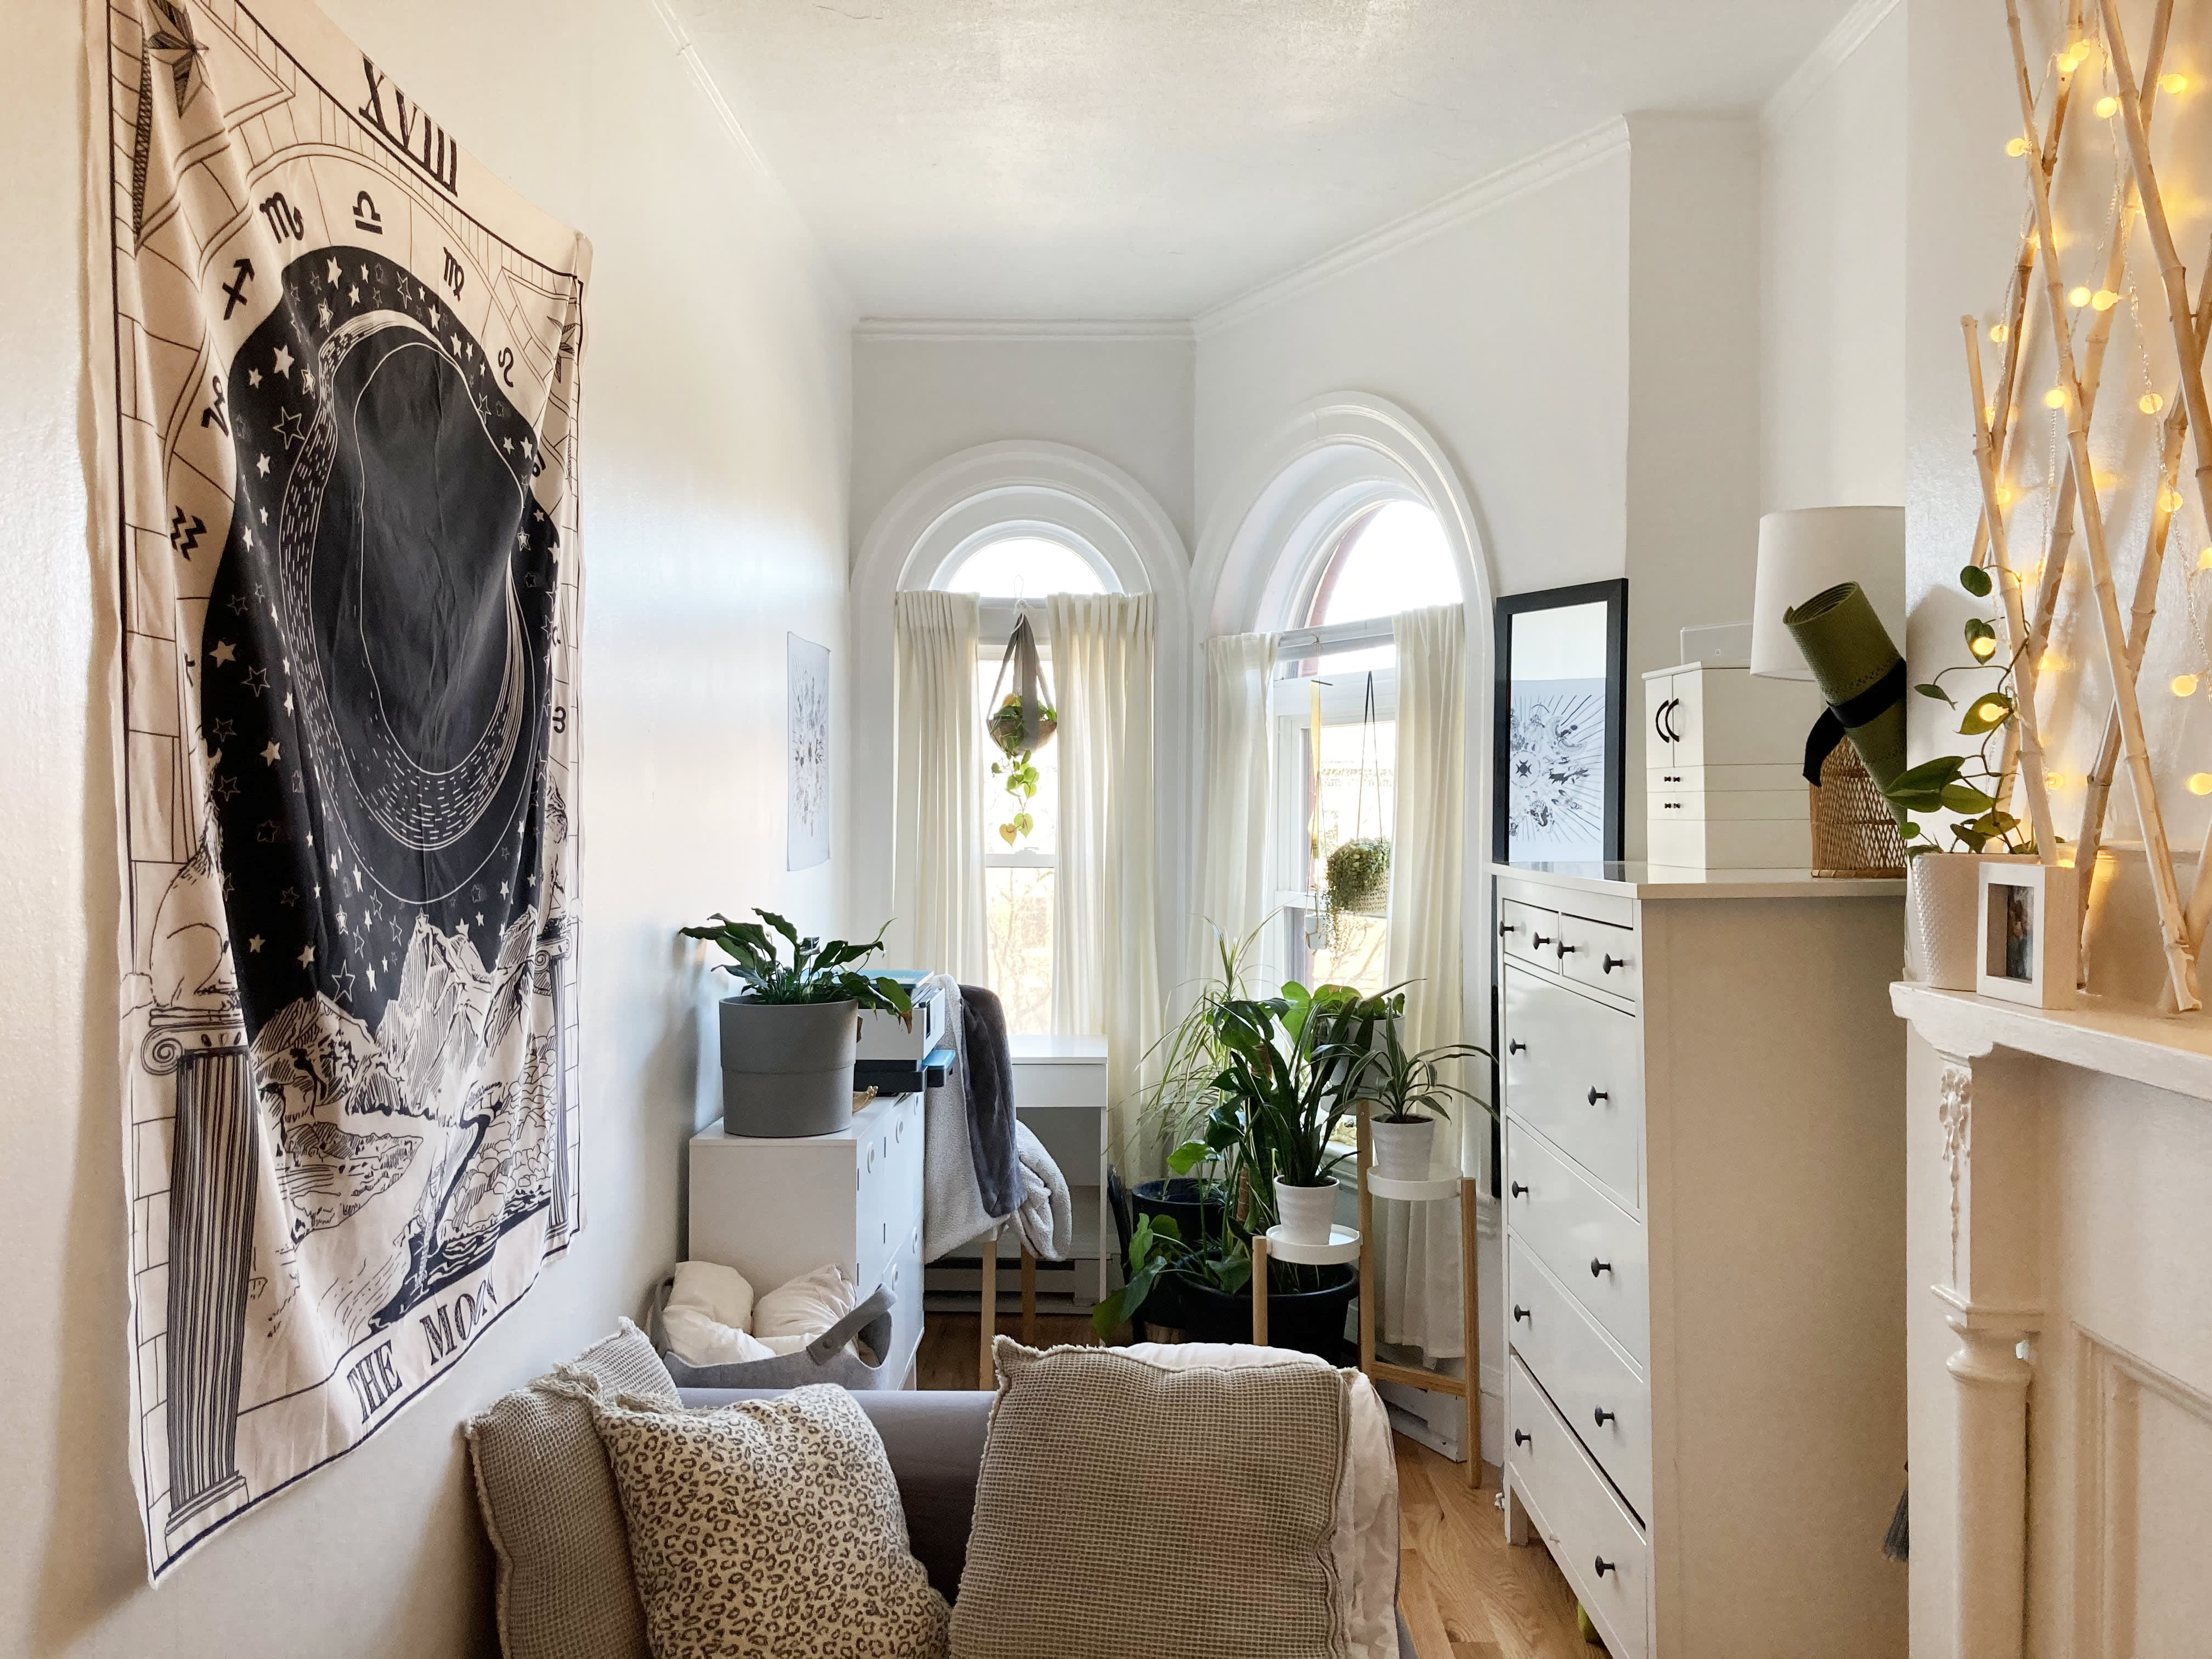 The Best Small Space, Narrow Room Decorating Tips, According to ...